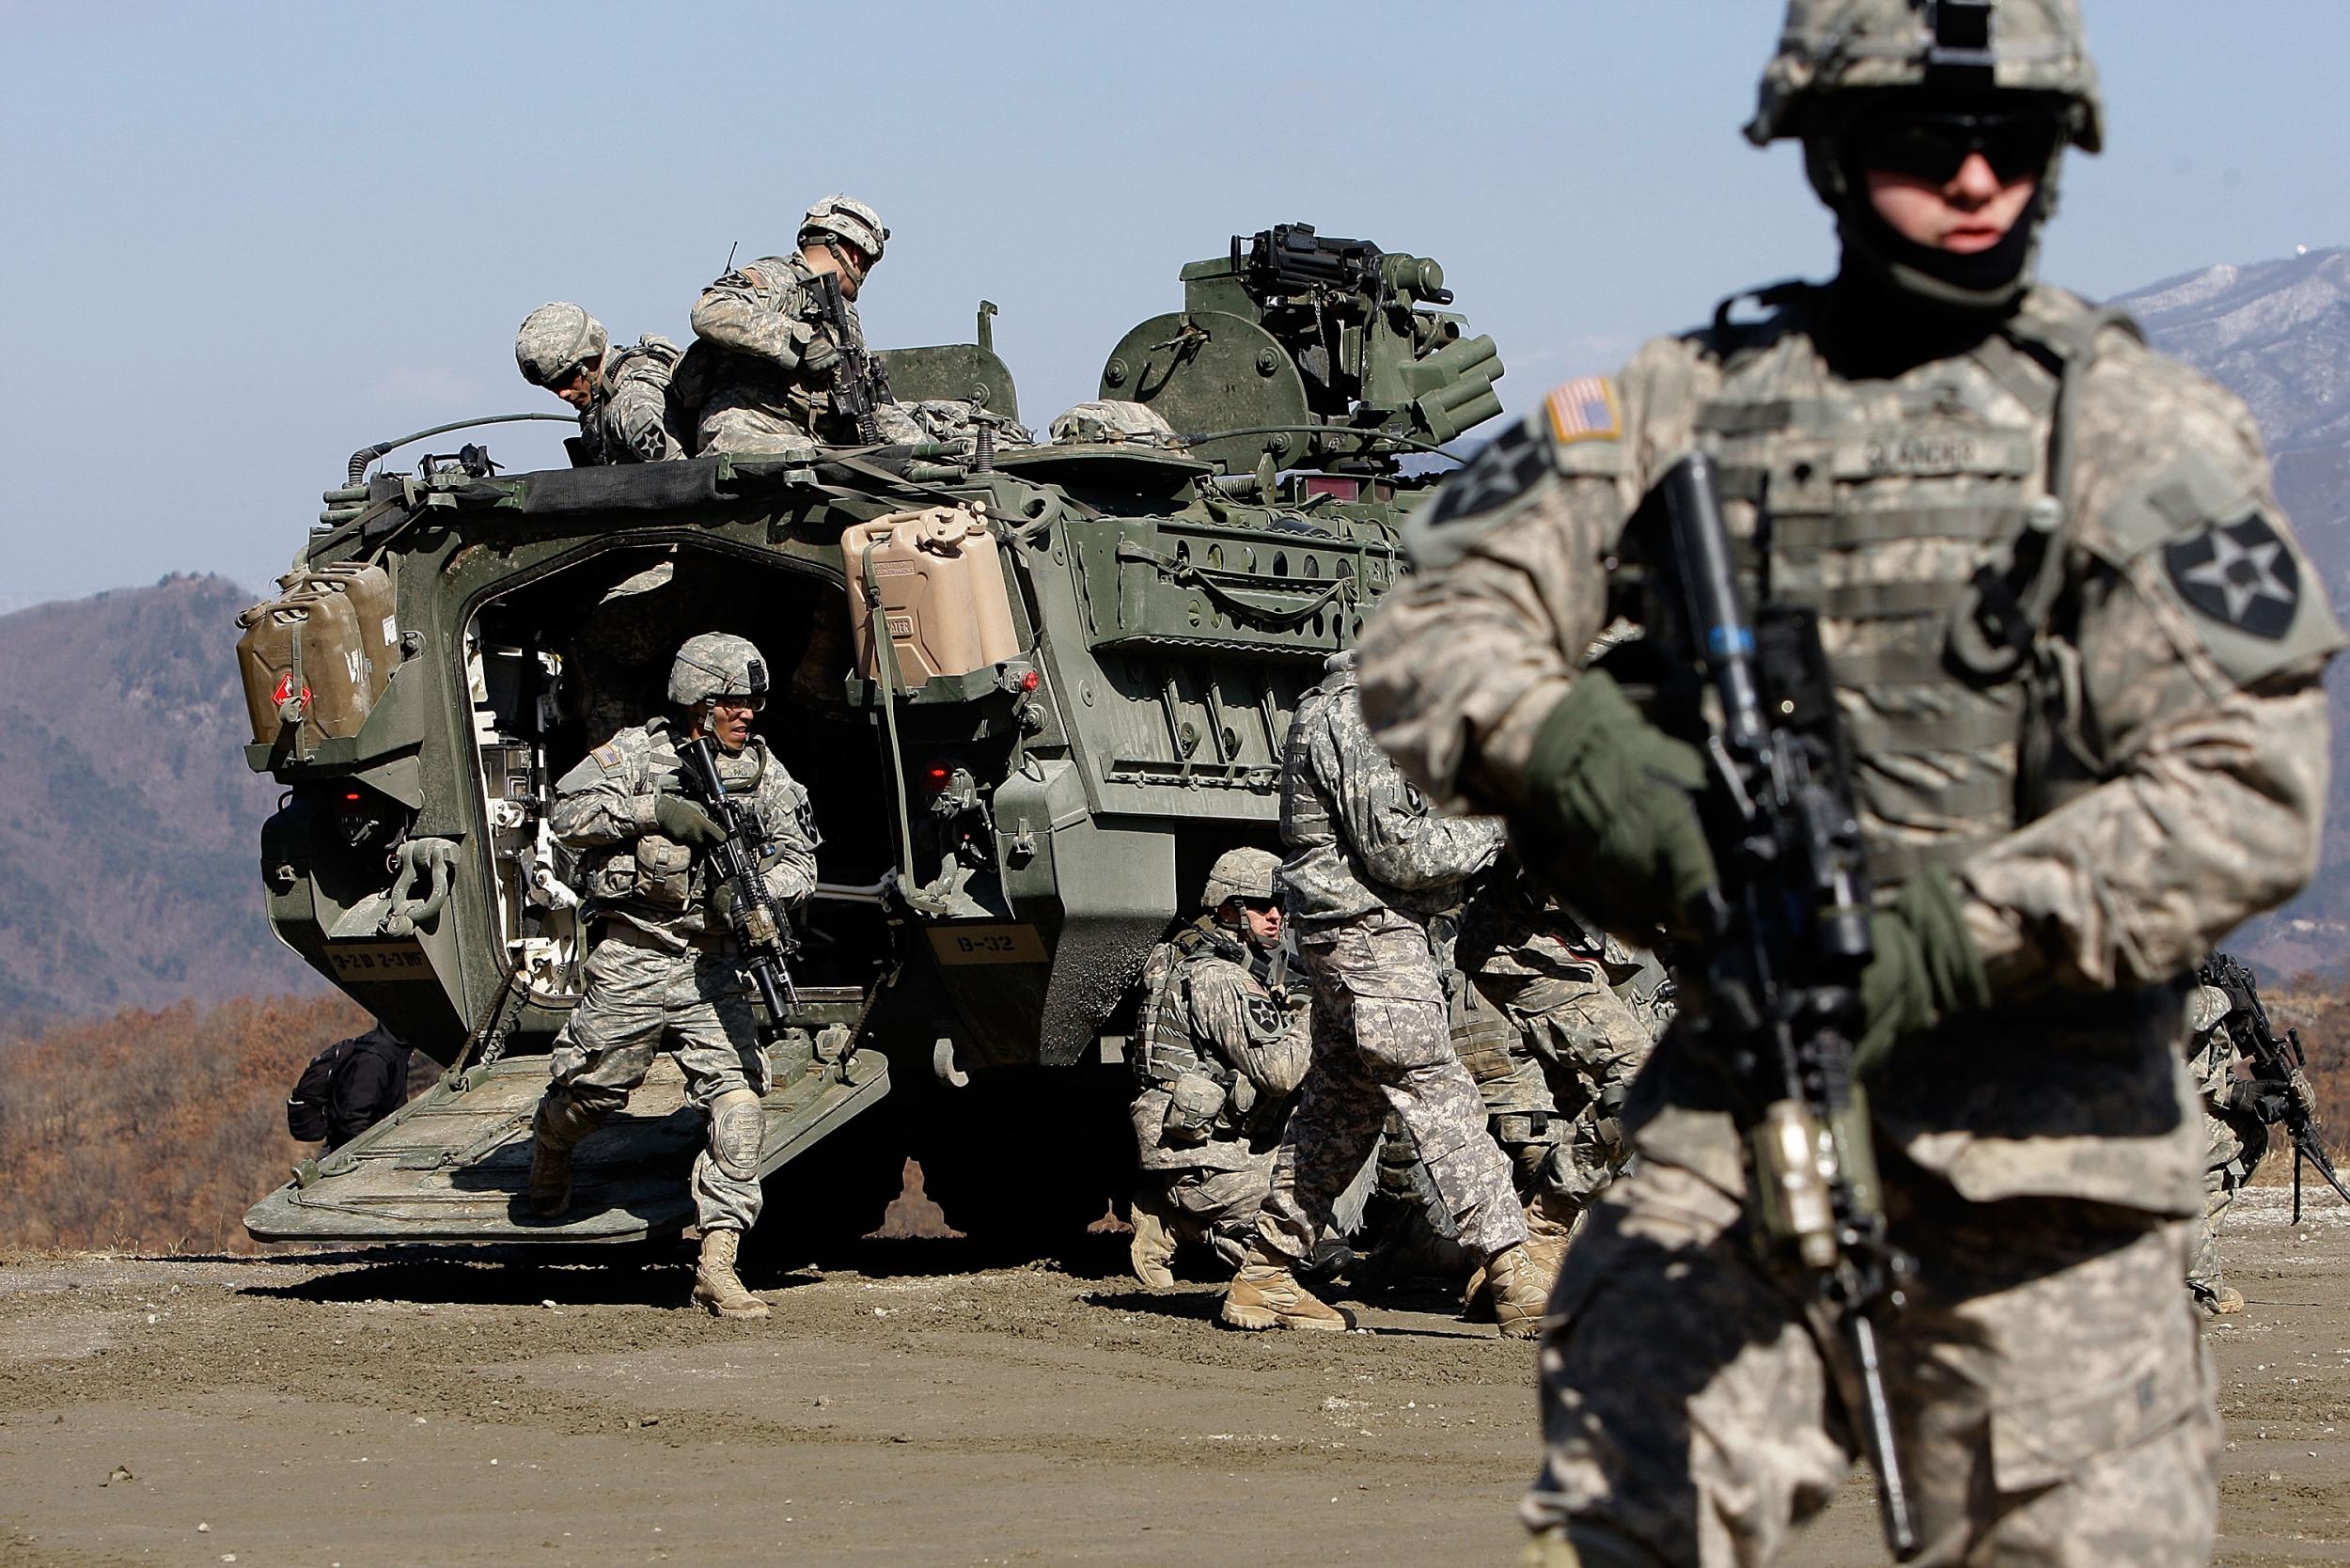 U.S. soldiers participate in the Key Resolve/Foal Eagle exercise in Pocheon, South Korea